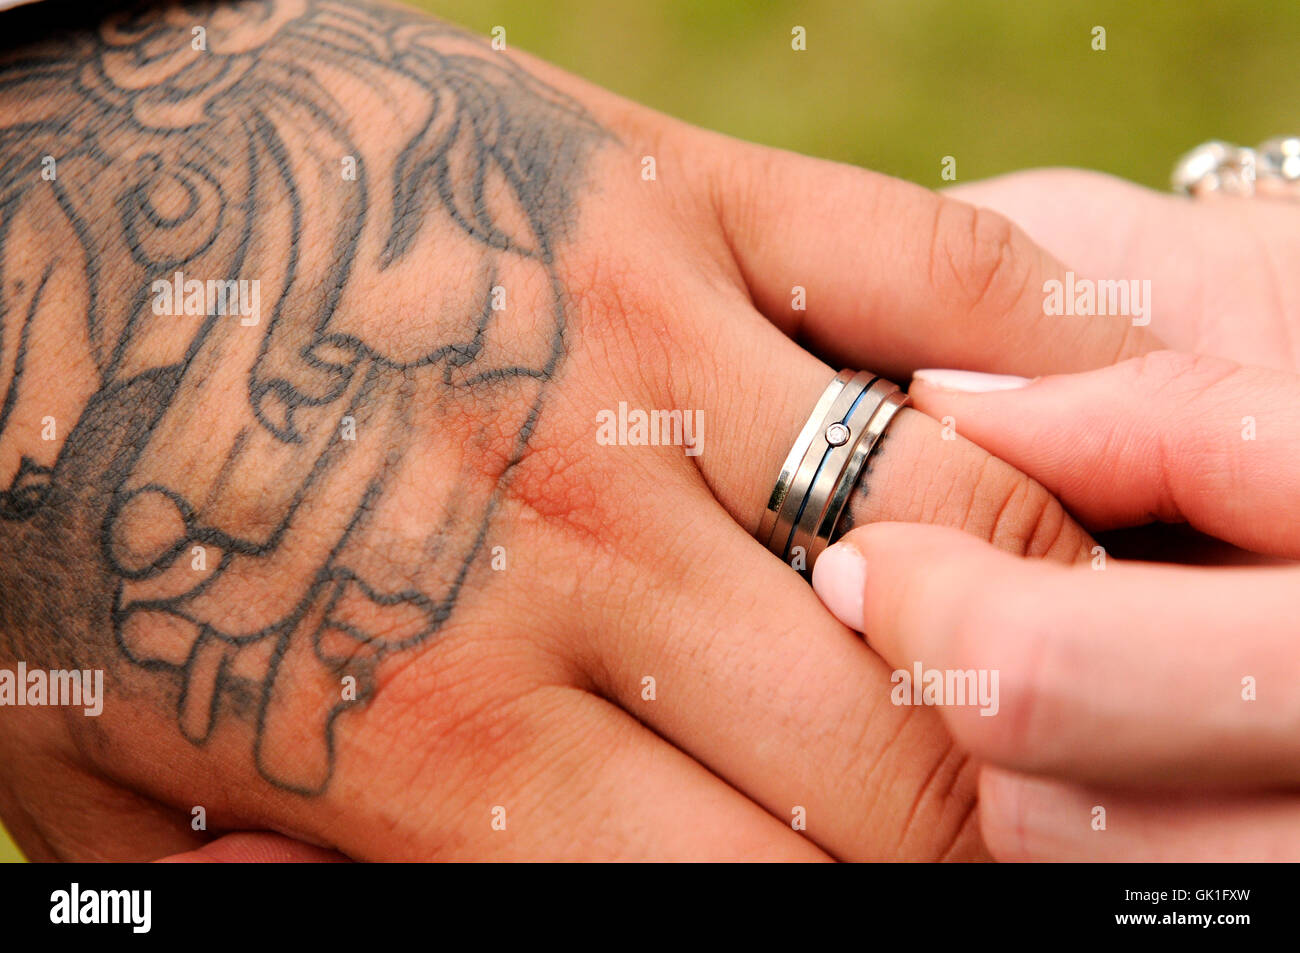 Wedding ring being pushed onto the groom's finger by the bride. Outdoor wedding ceremony. Stock Photo